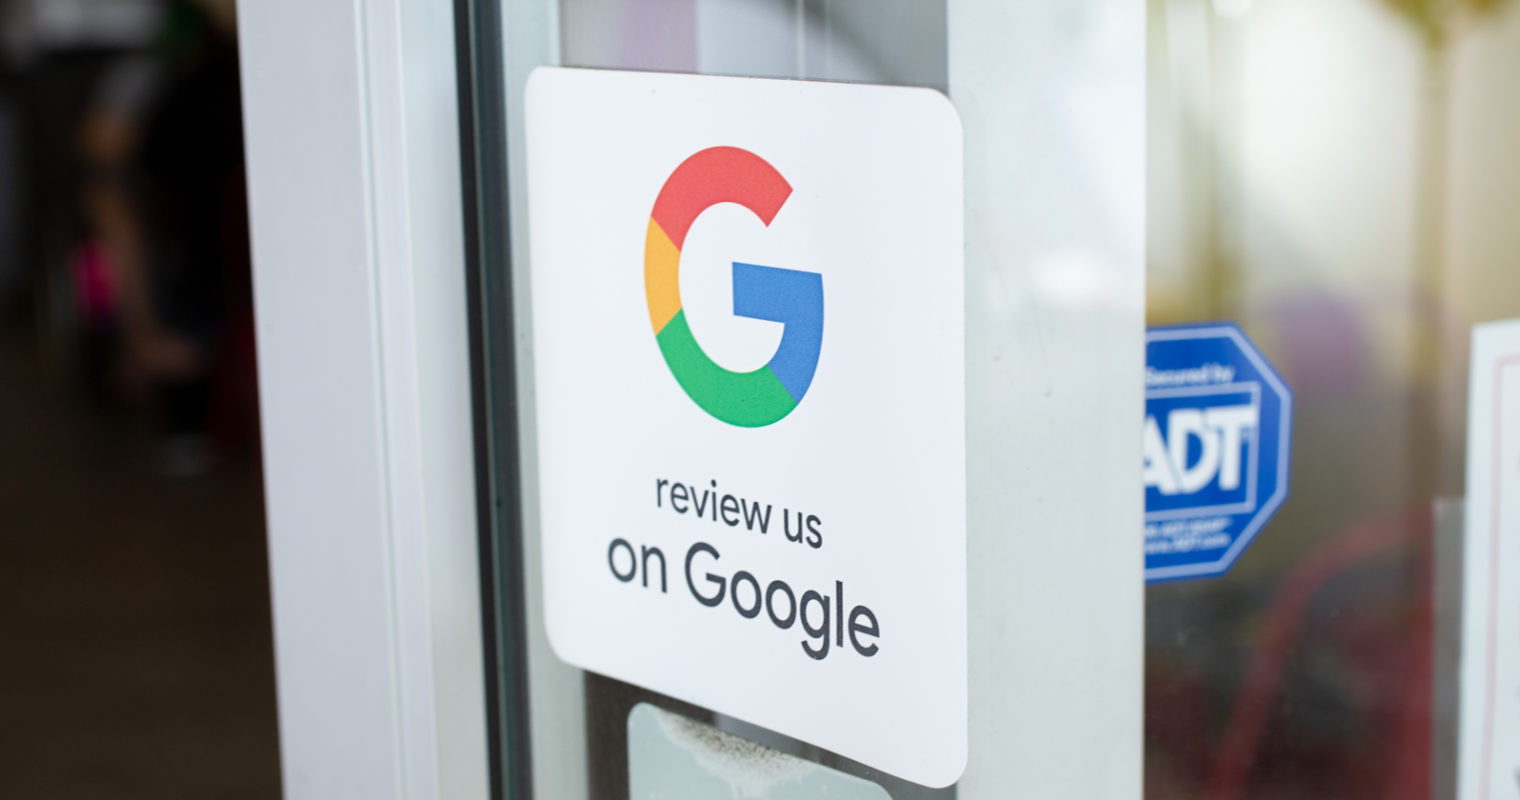 Google can update business hours on local listings and AI